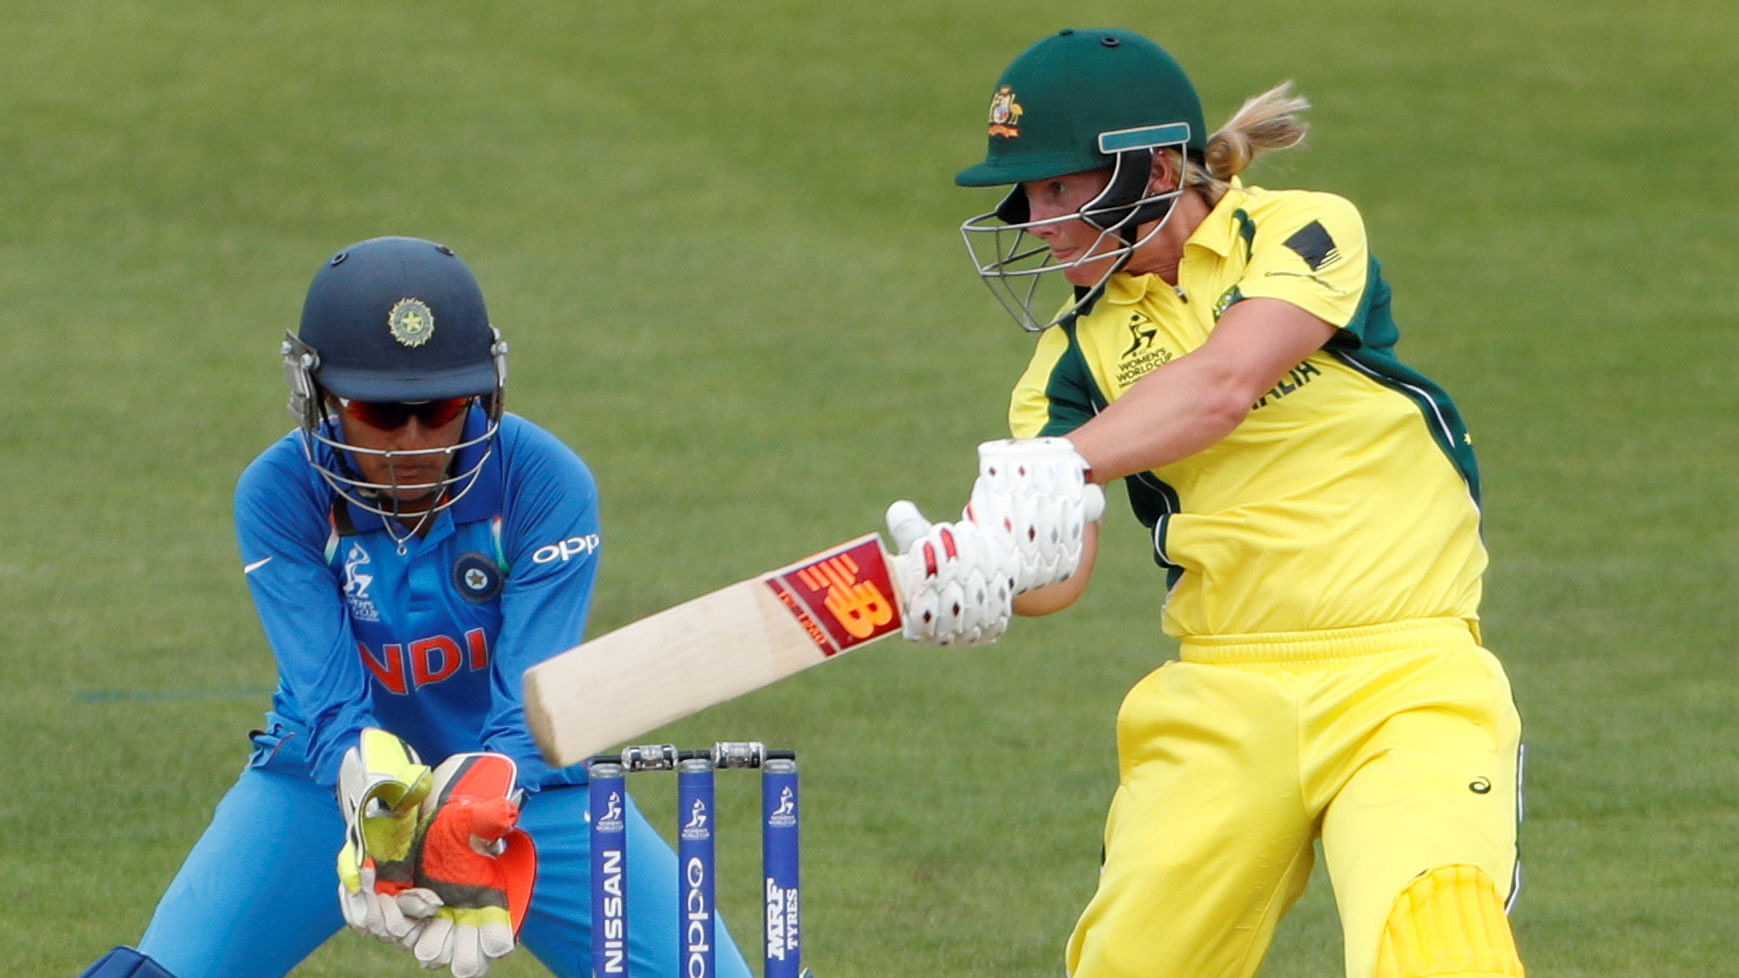 Meg Lanning will be leading Australia in their title defense at the ICC Women’s T20 World Cup starting on 21 February in Sydney.